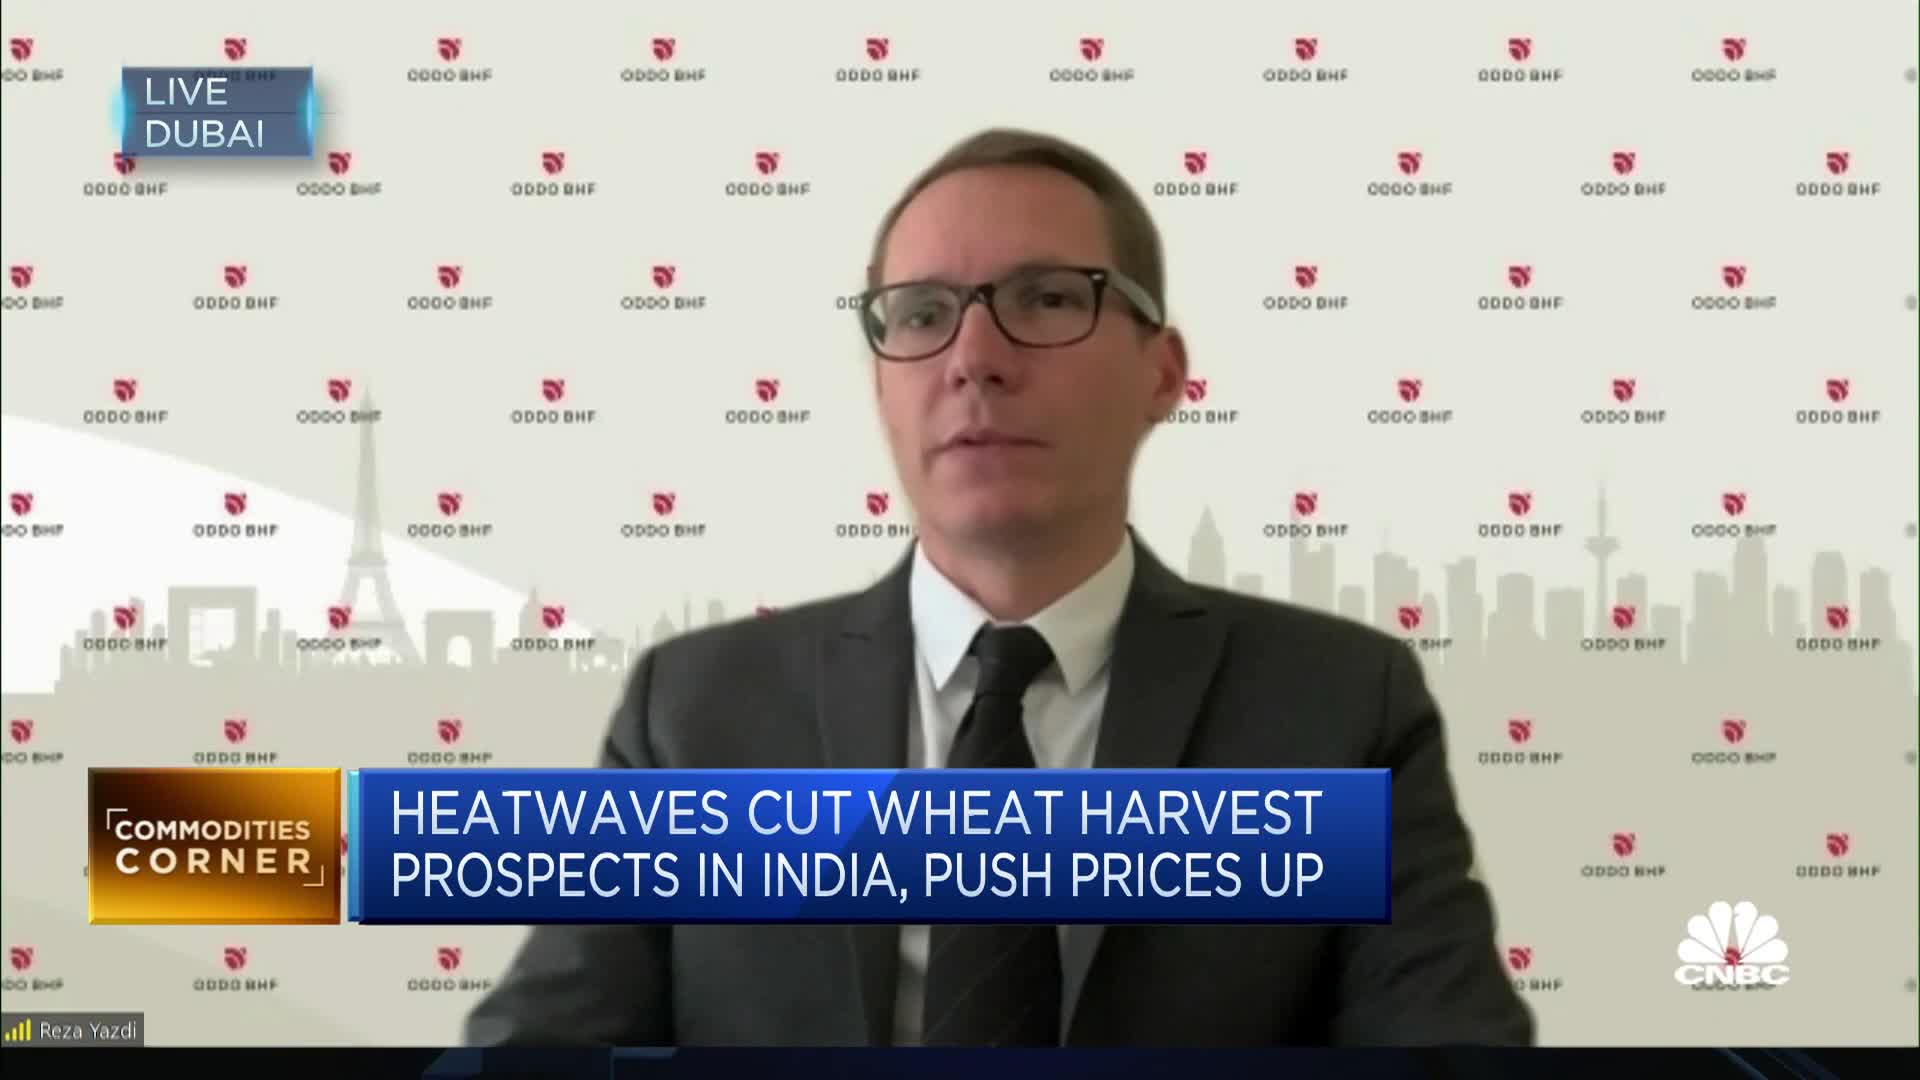 Financial services firm discusses alternative supplies in light of India's wheat export ban